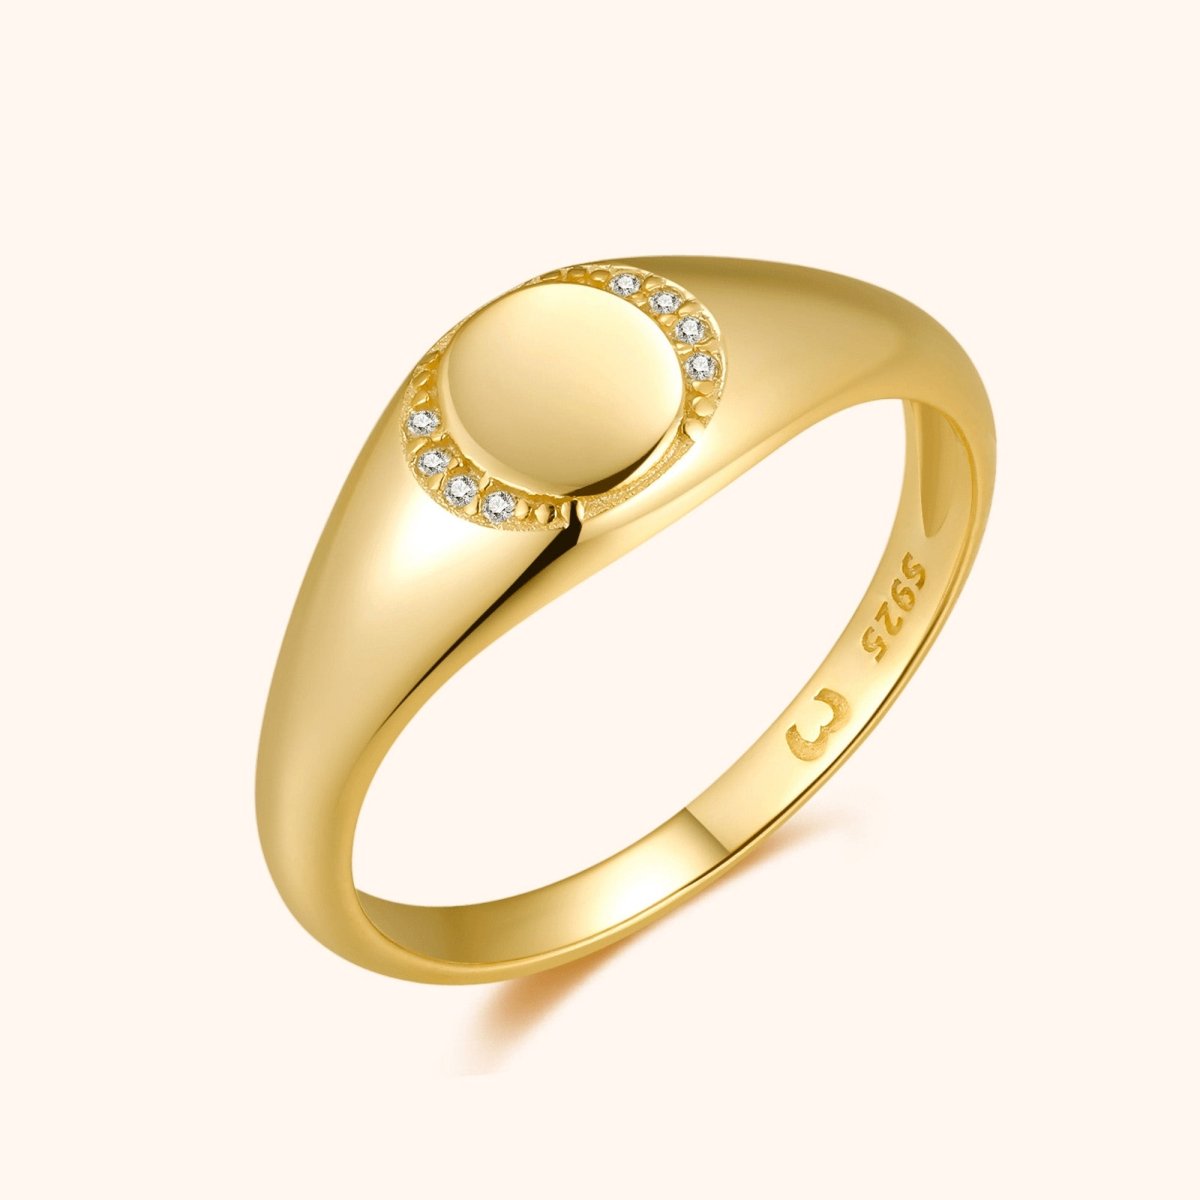 "Bright Surrounded" Ring - Milas Jewels Shop